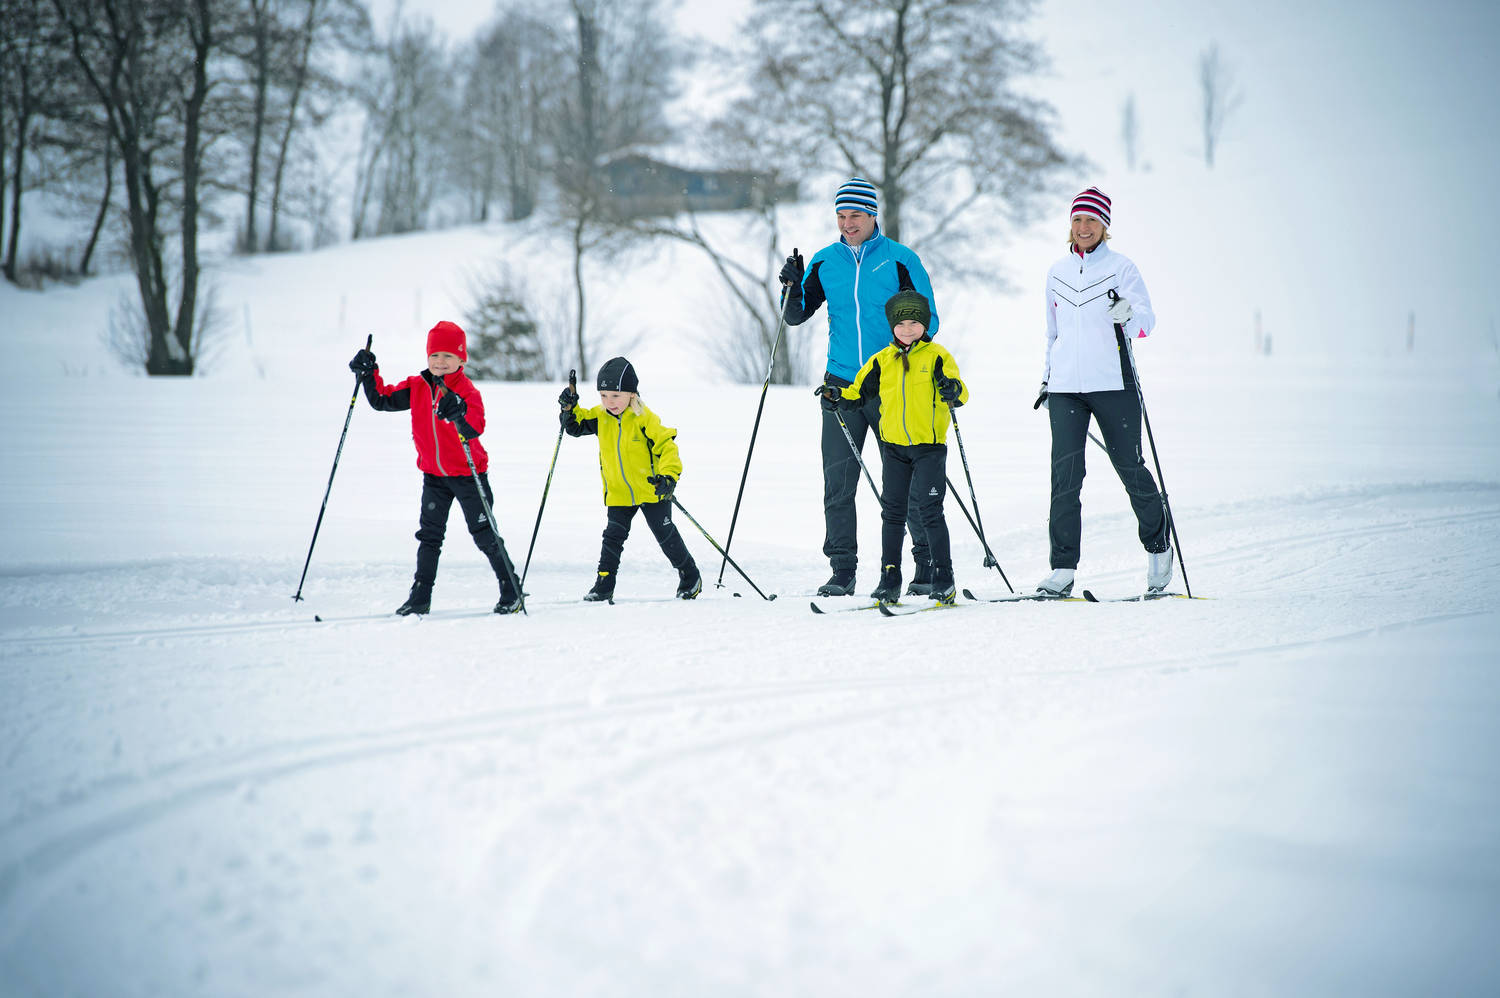 Great Tips for Cross Country Skiing with Kids